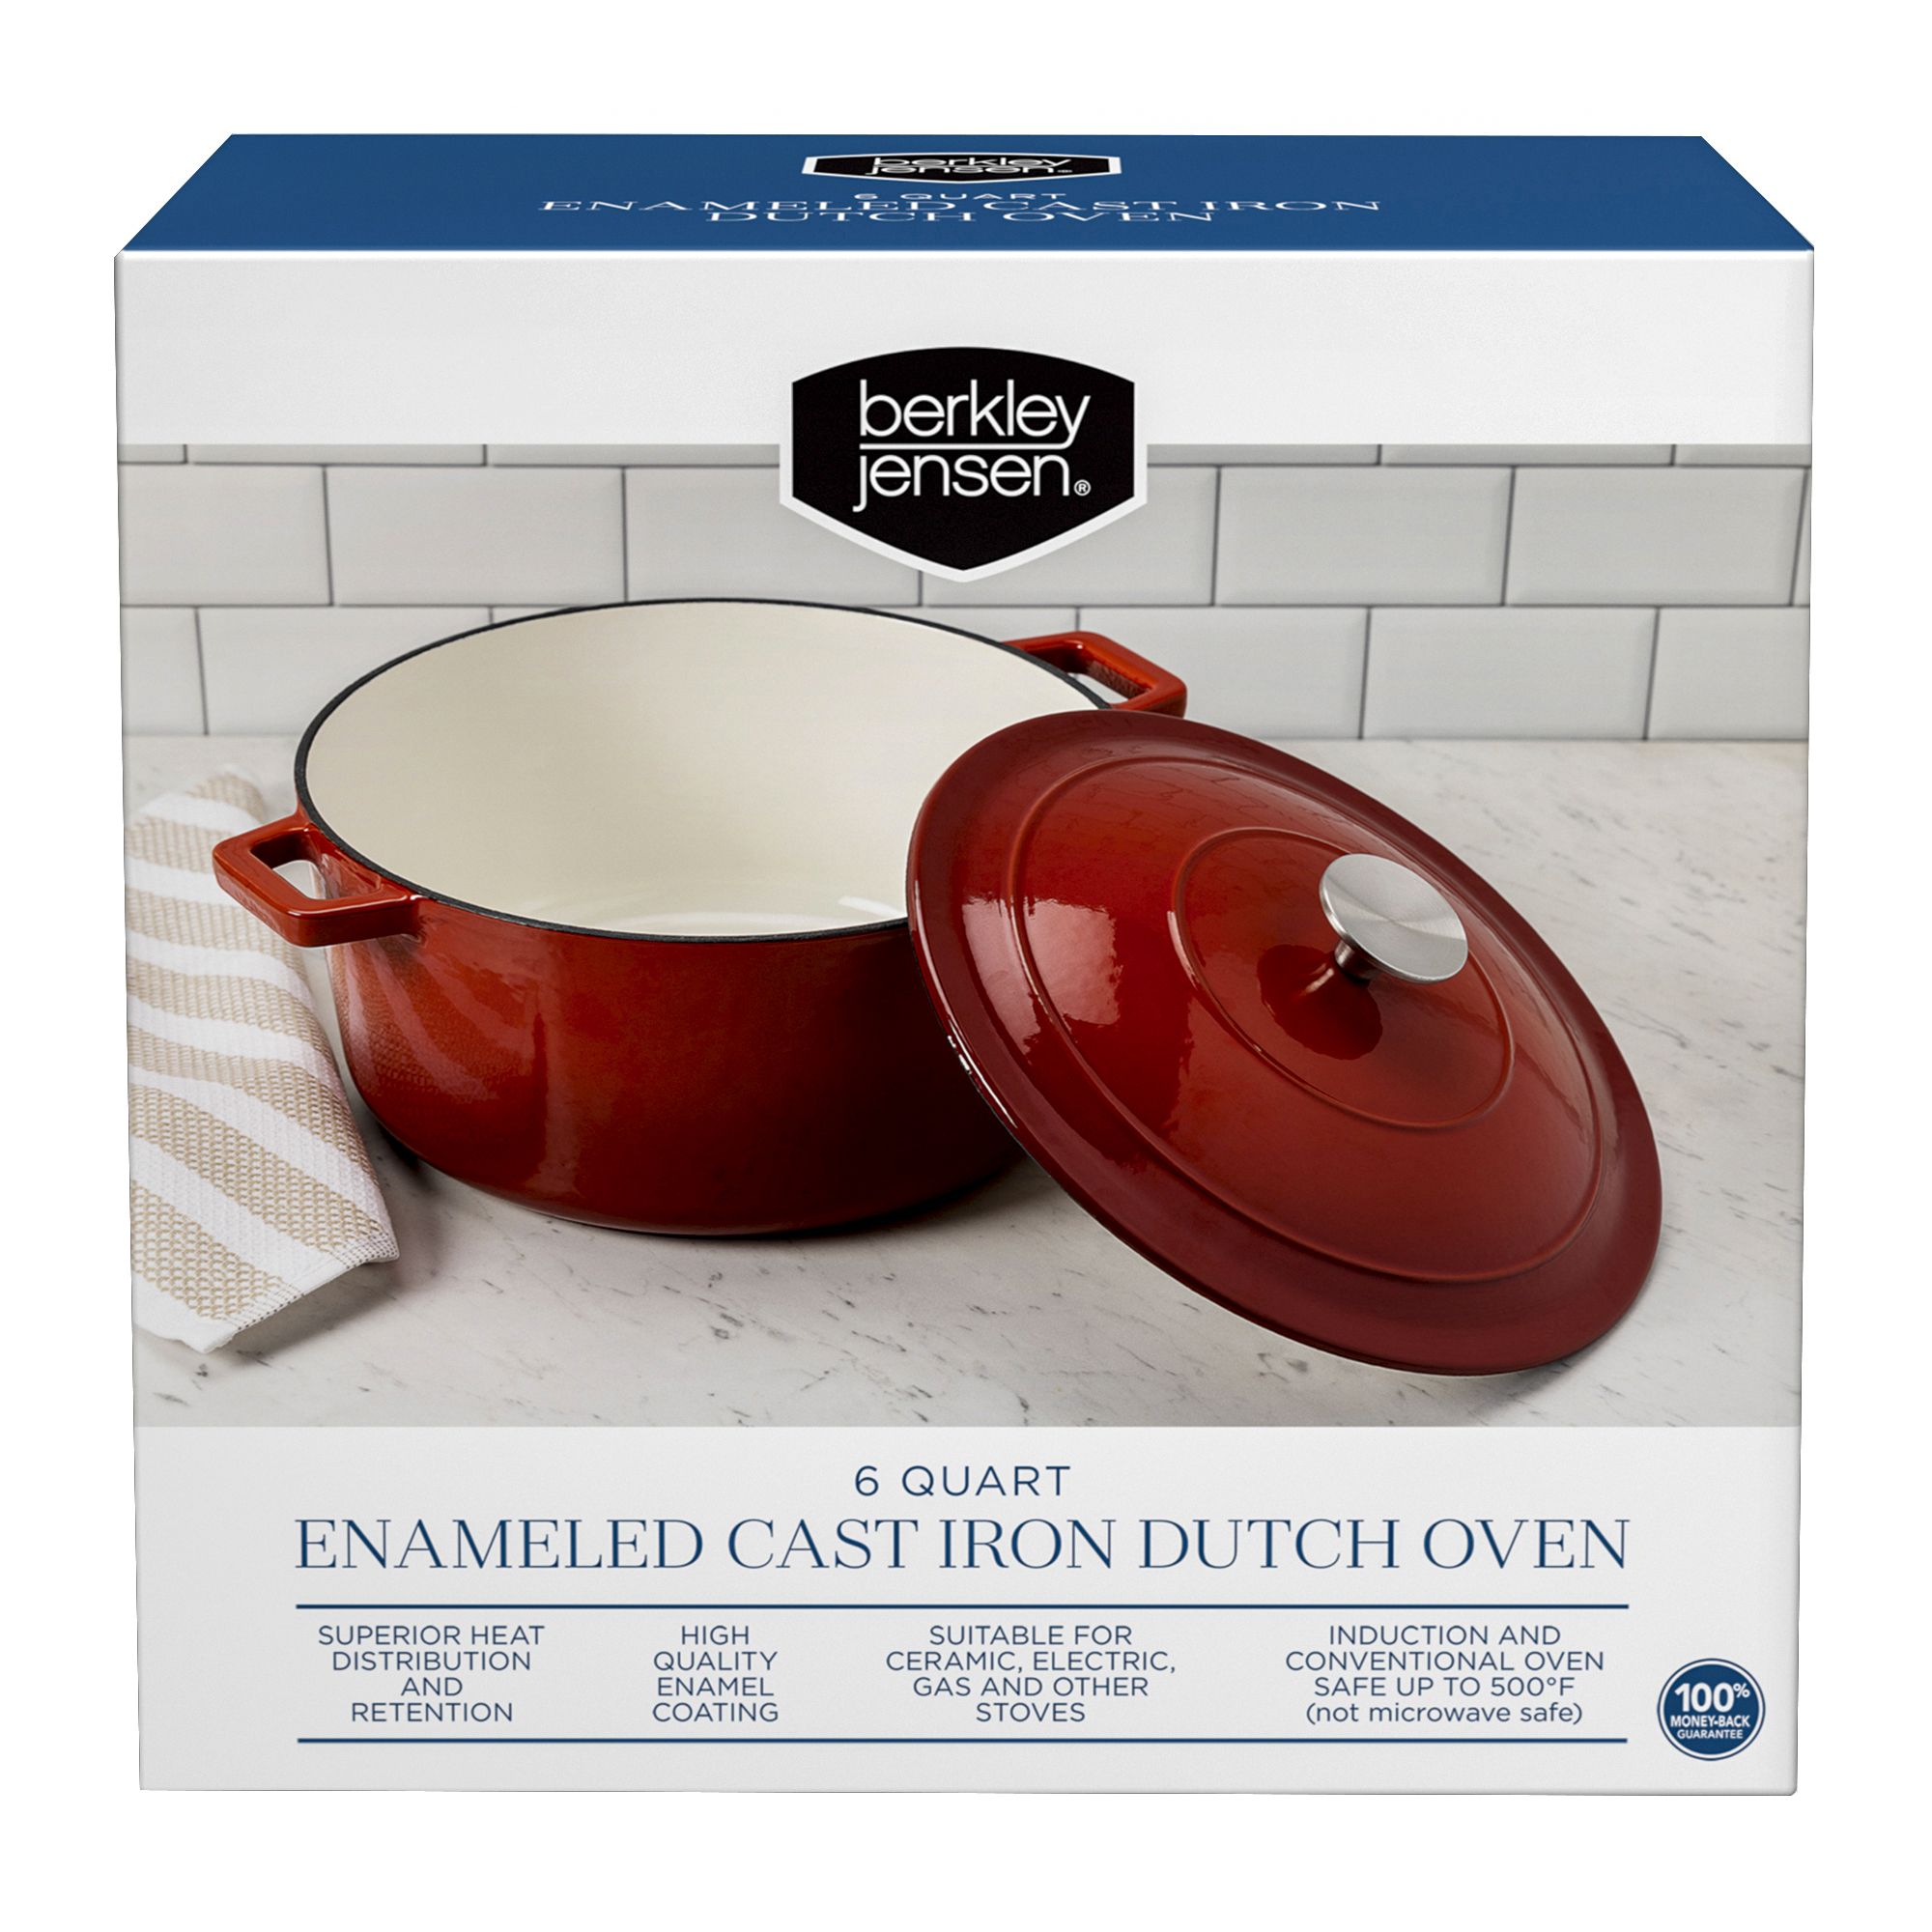 Cast Iron Dutch Oven with Lid-6 Quart Enamel Coated Pot for Oven